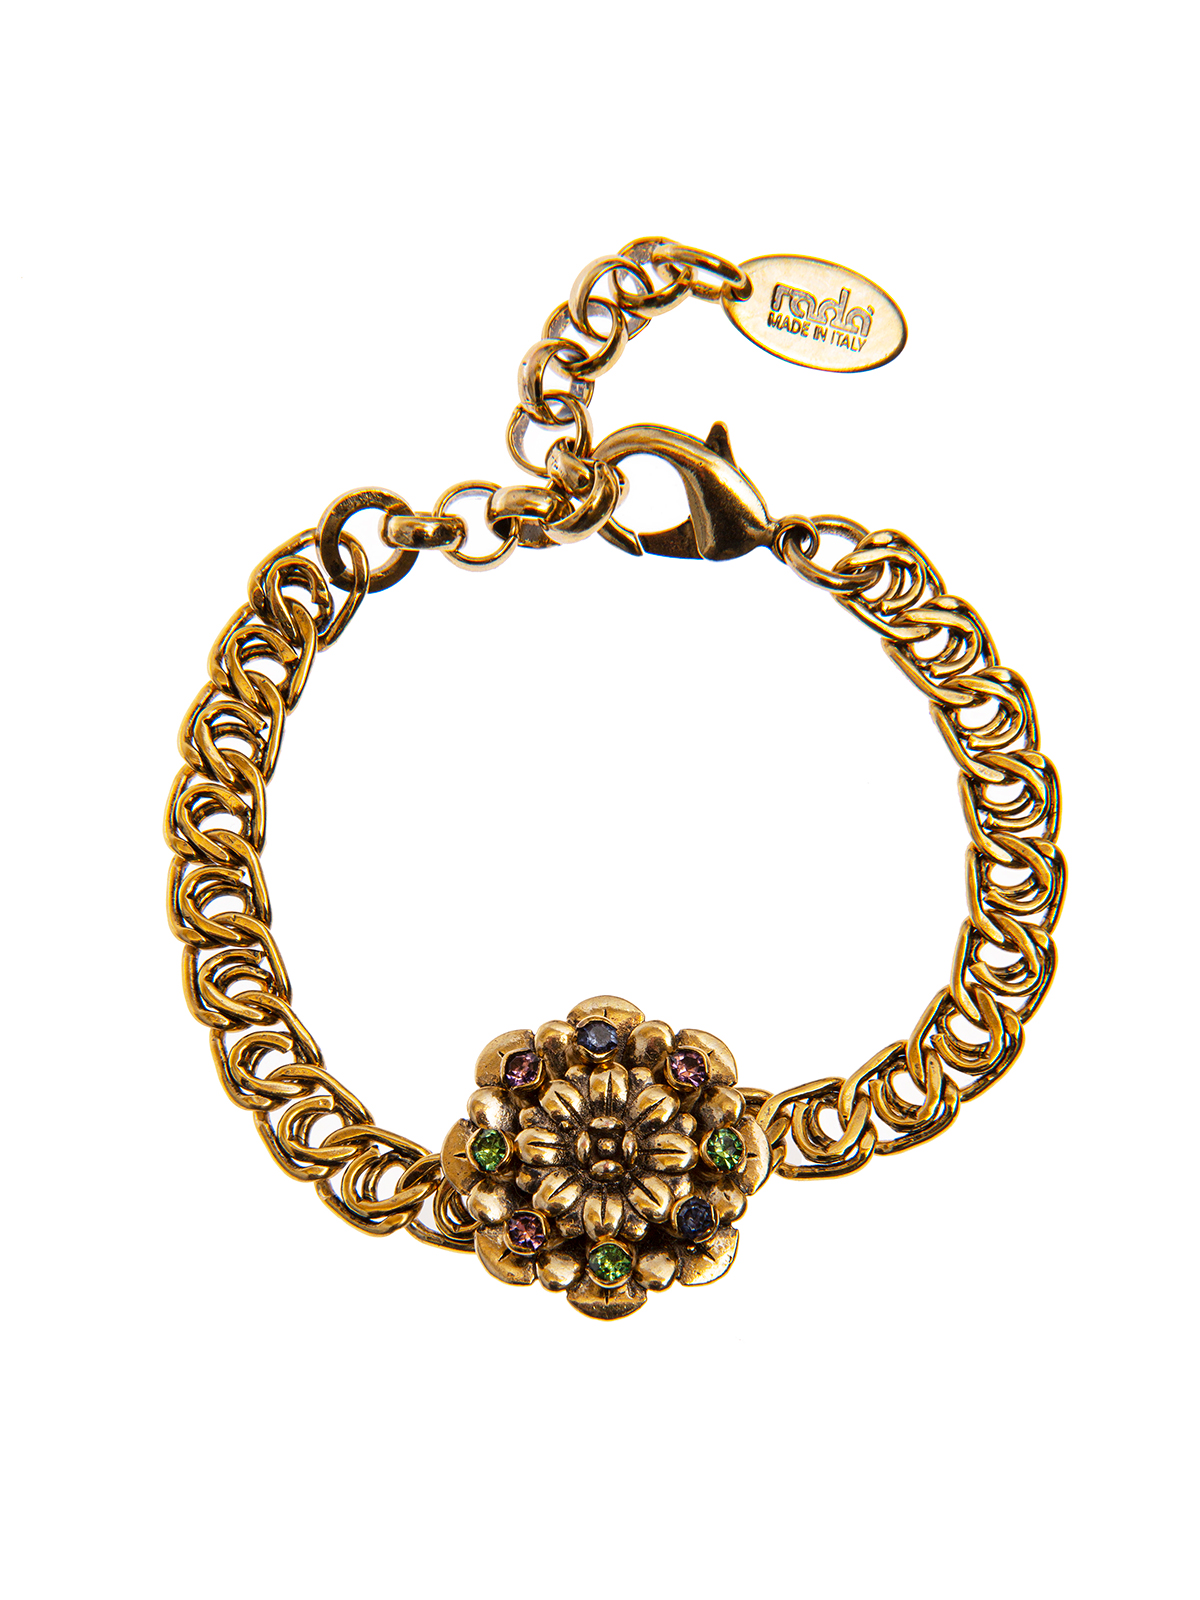 Chain bracelet with central flower embellished with multicolor stones